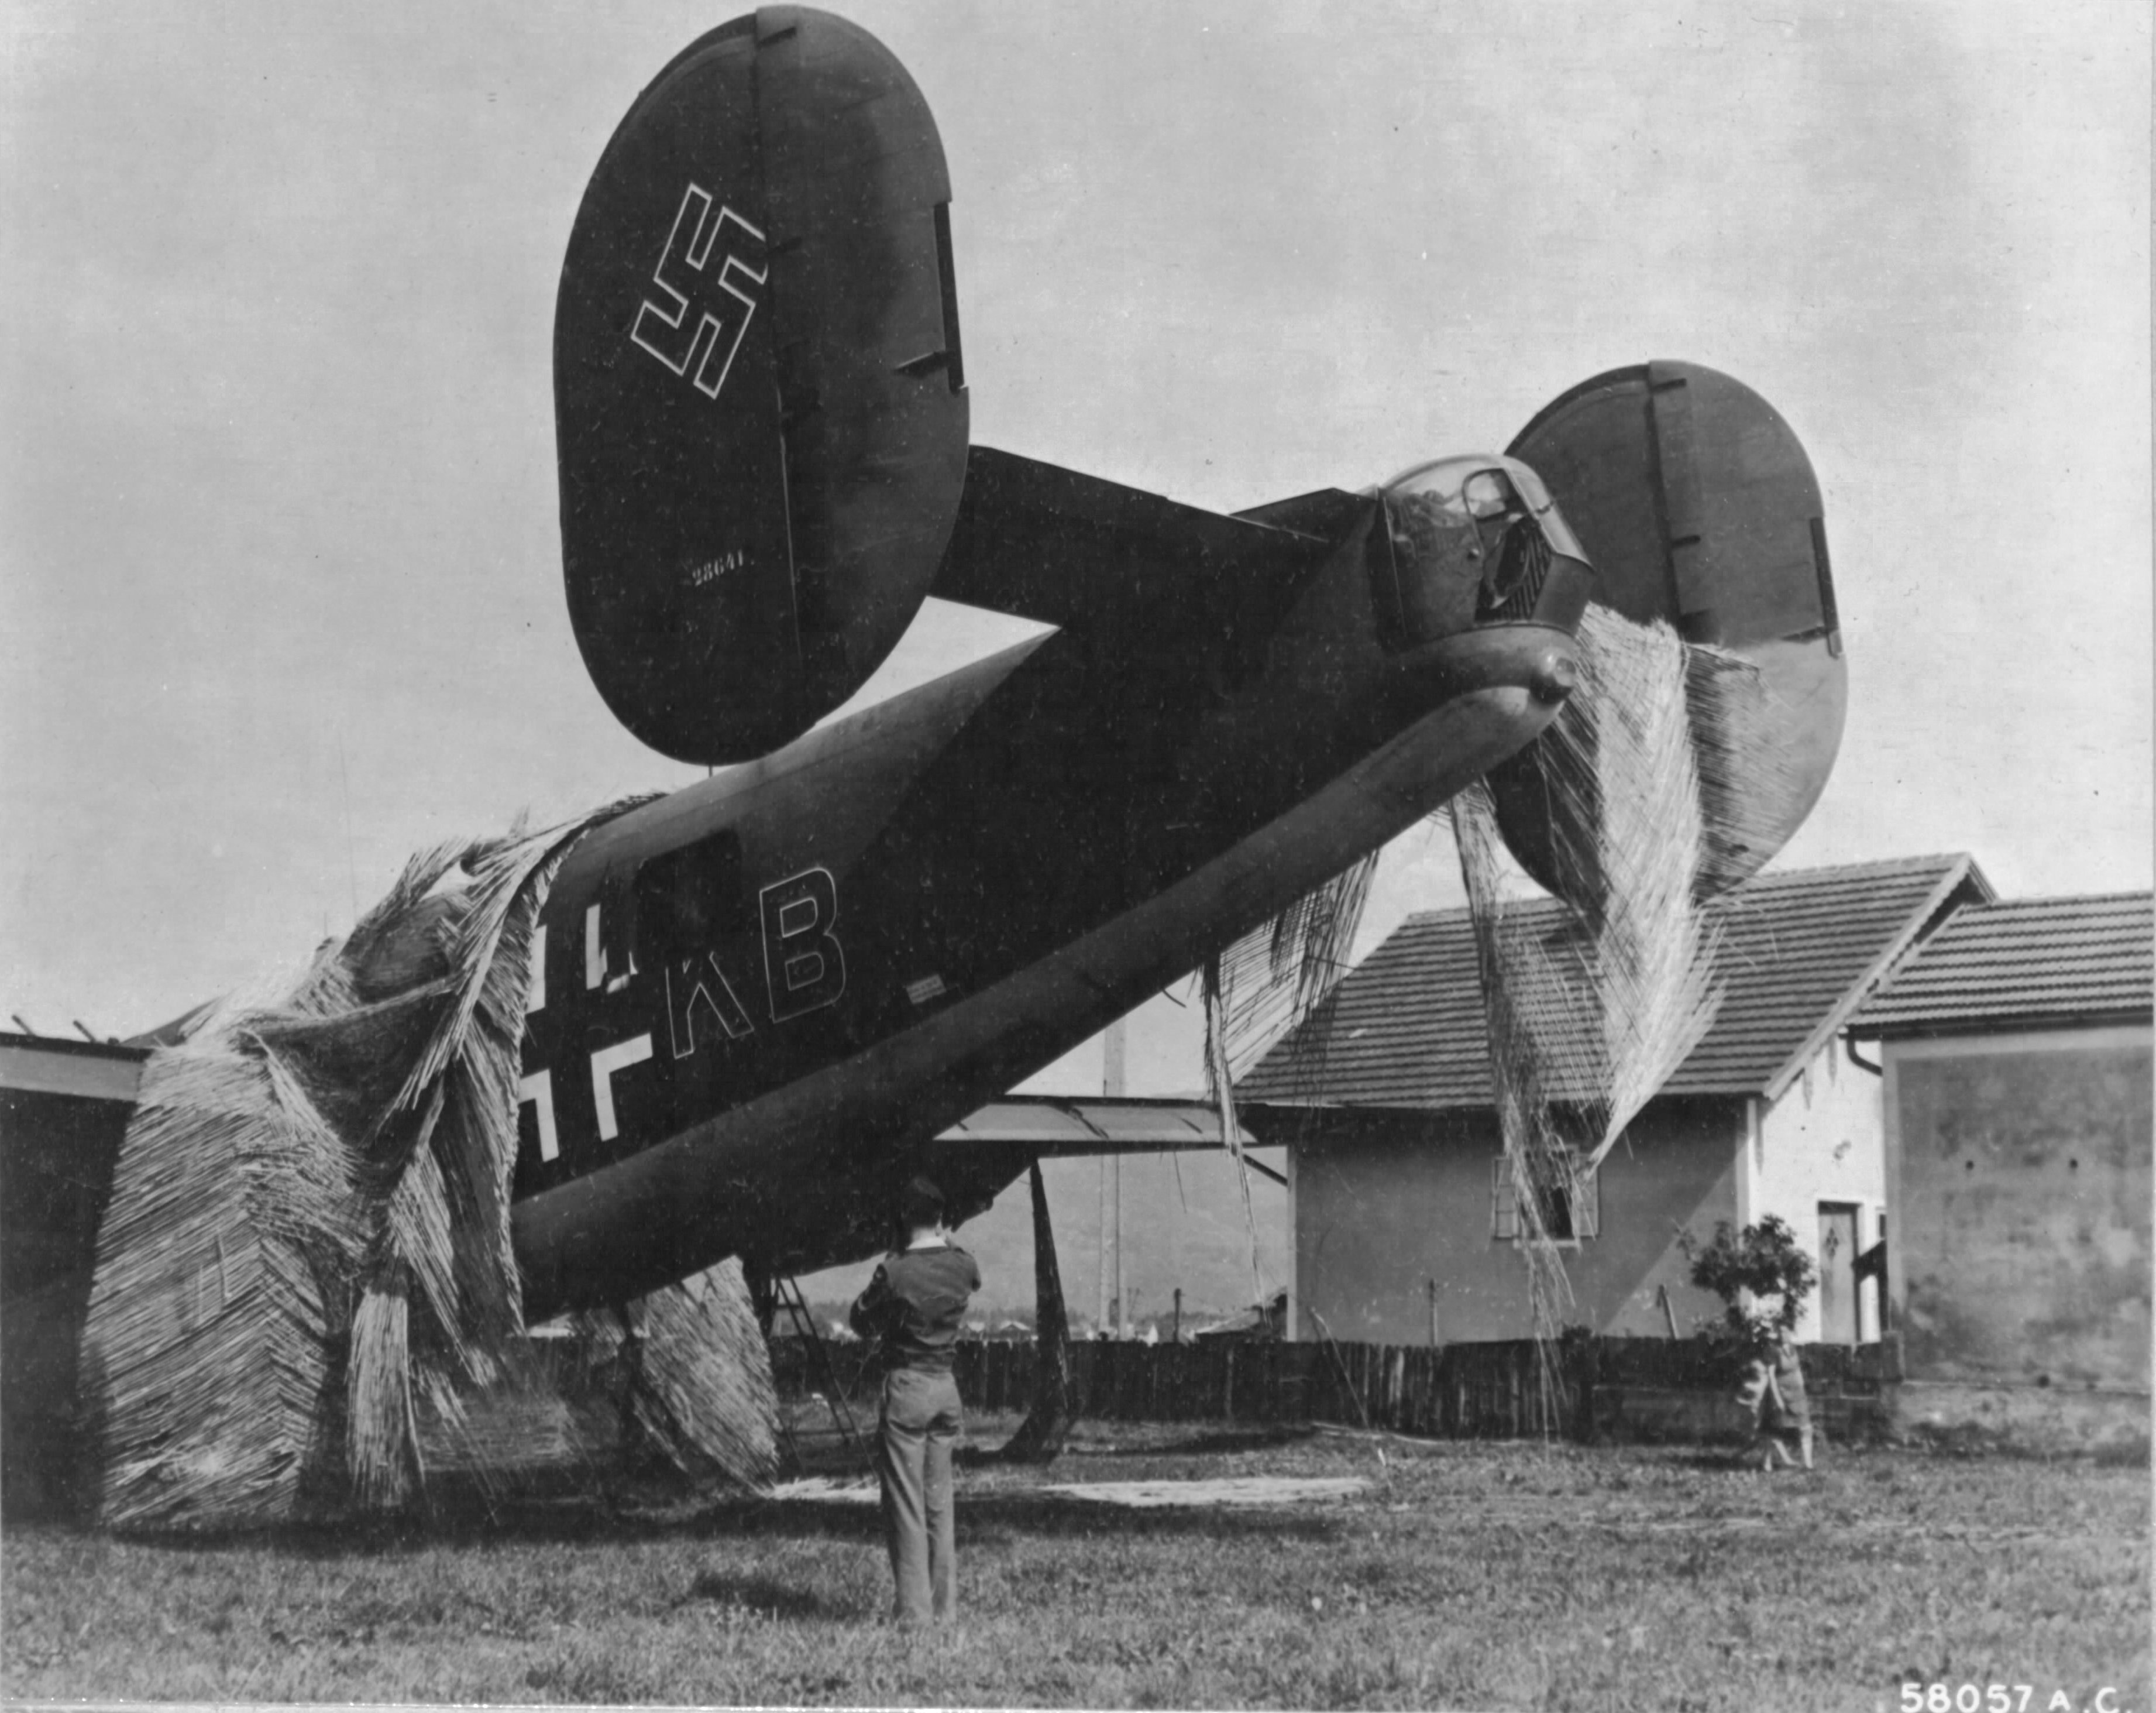 B-24H of the 732nd Bomb Squadron was force to land at a Luftwaffe airfield in France Feb 4 1944. It was repaired and flown by the Germans as A3+KB. It was then recaptured at Salzburg, Austria in May 1945 where it was examined here by SSgt JT Sipkovsky